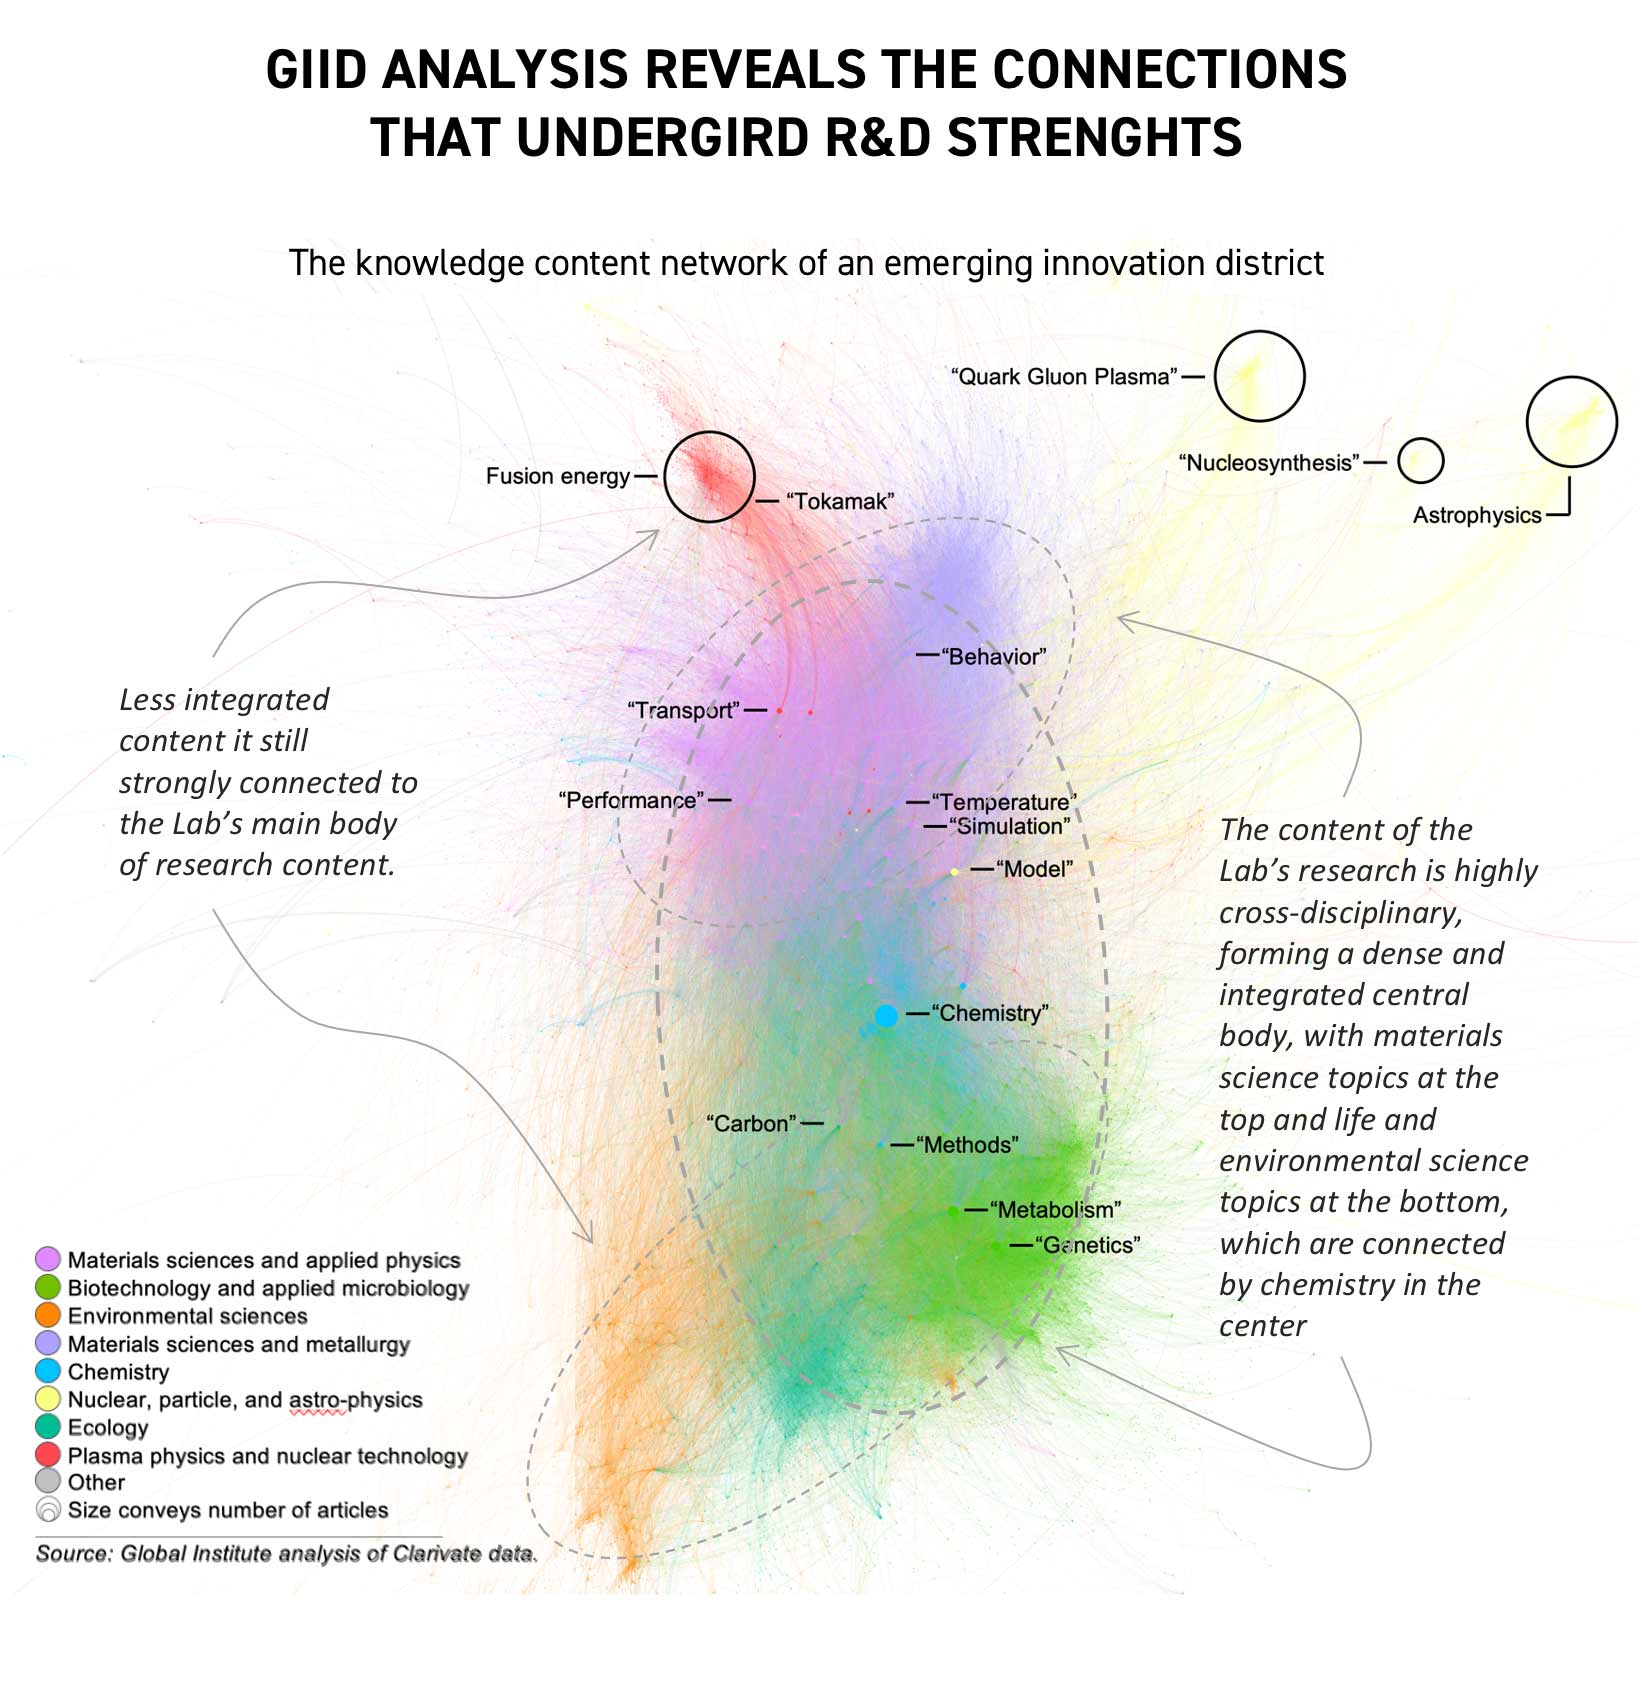 GIID ANALYSIS REVEALS THE CONNECTIONS THAT UNDERGIRD R&D STRENGTHS